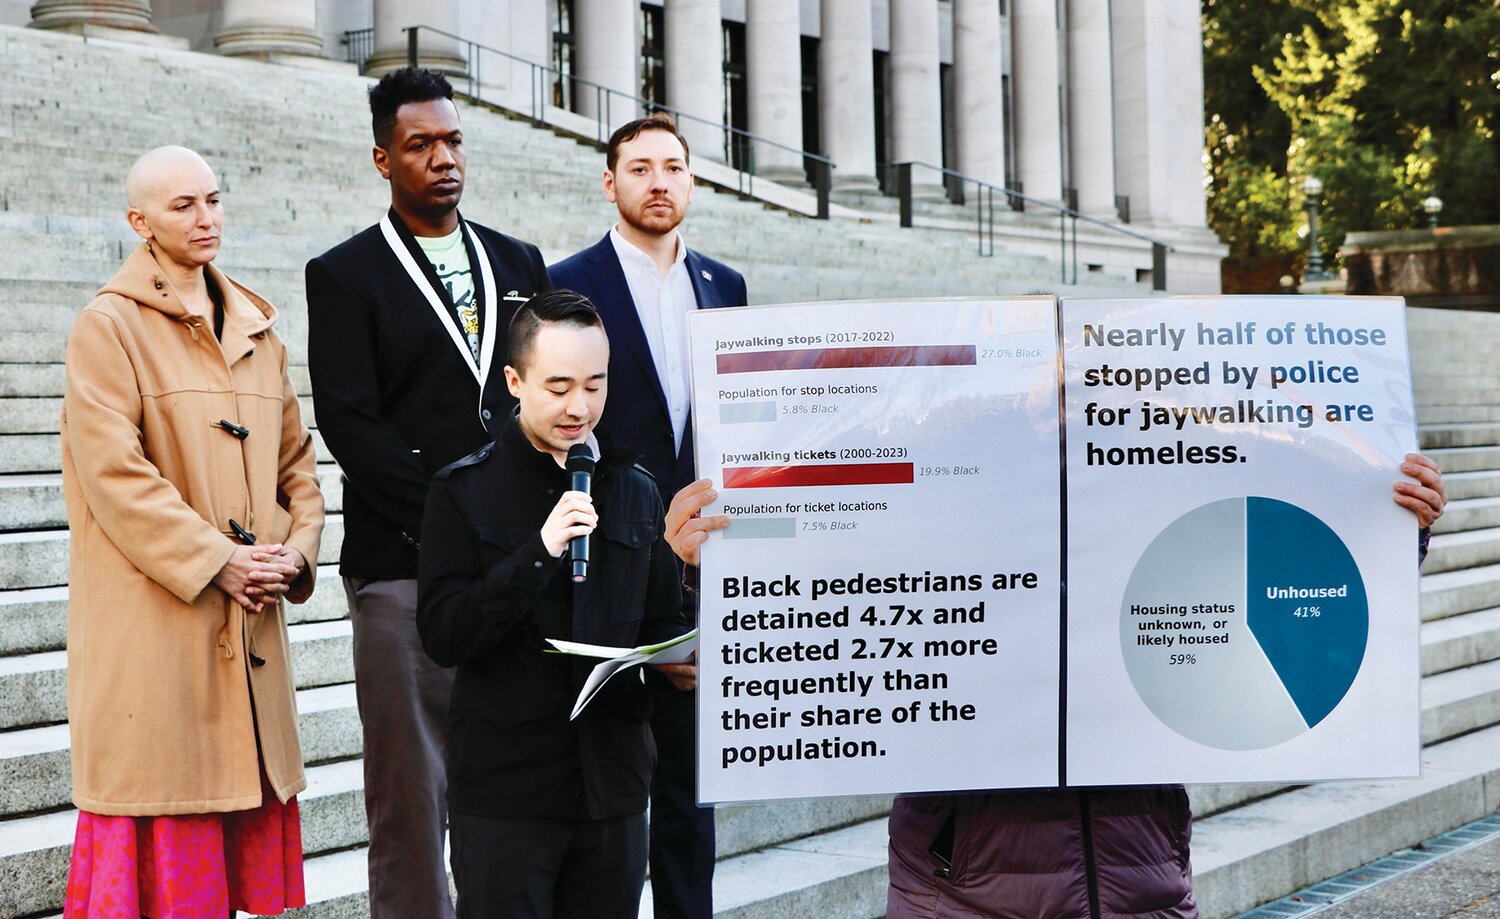 Taking their arguments on jaywalking to the steps of the Capitol in Olympia are, from left in the back row: Sen. Rebecca Saldana, community member DeAndre Anderson, Advocacy Director at Transportation Choices Matthew Sutherland, holding microphone, and research partner Ethan C. Campbell. Jan. 23. Transportation Choices held a press conference on the north steps of the Washington State Capitol to unveil a new research report that shows disparate impacts of jaywalking enforcement.